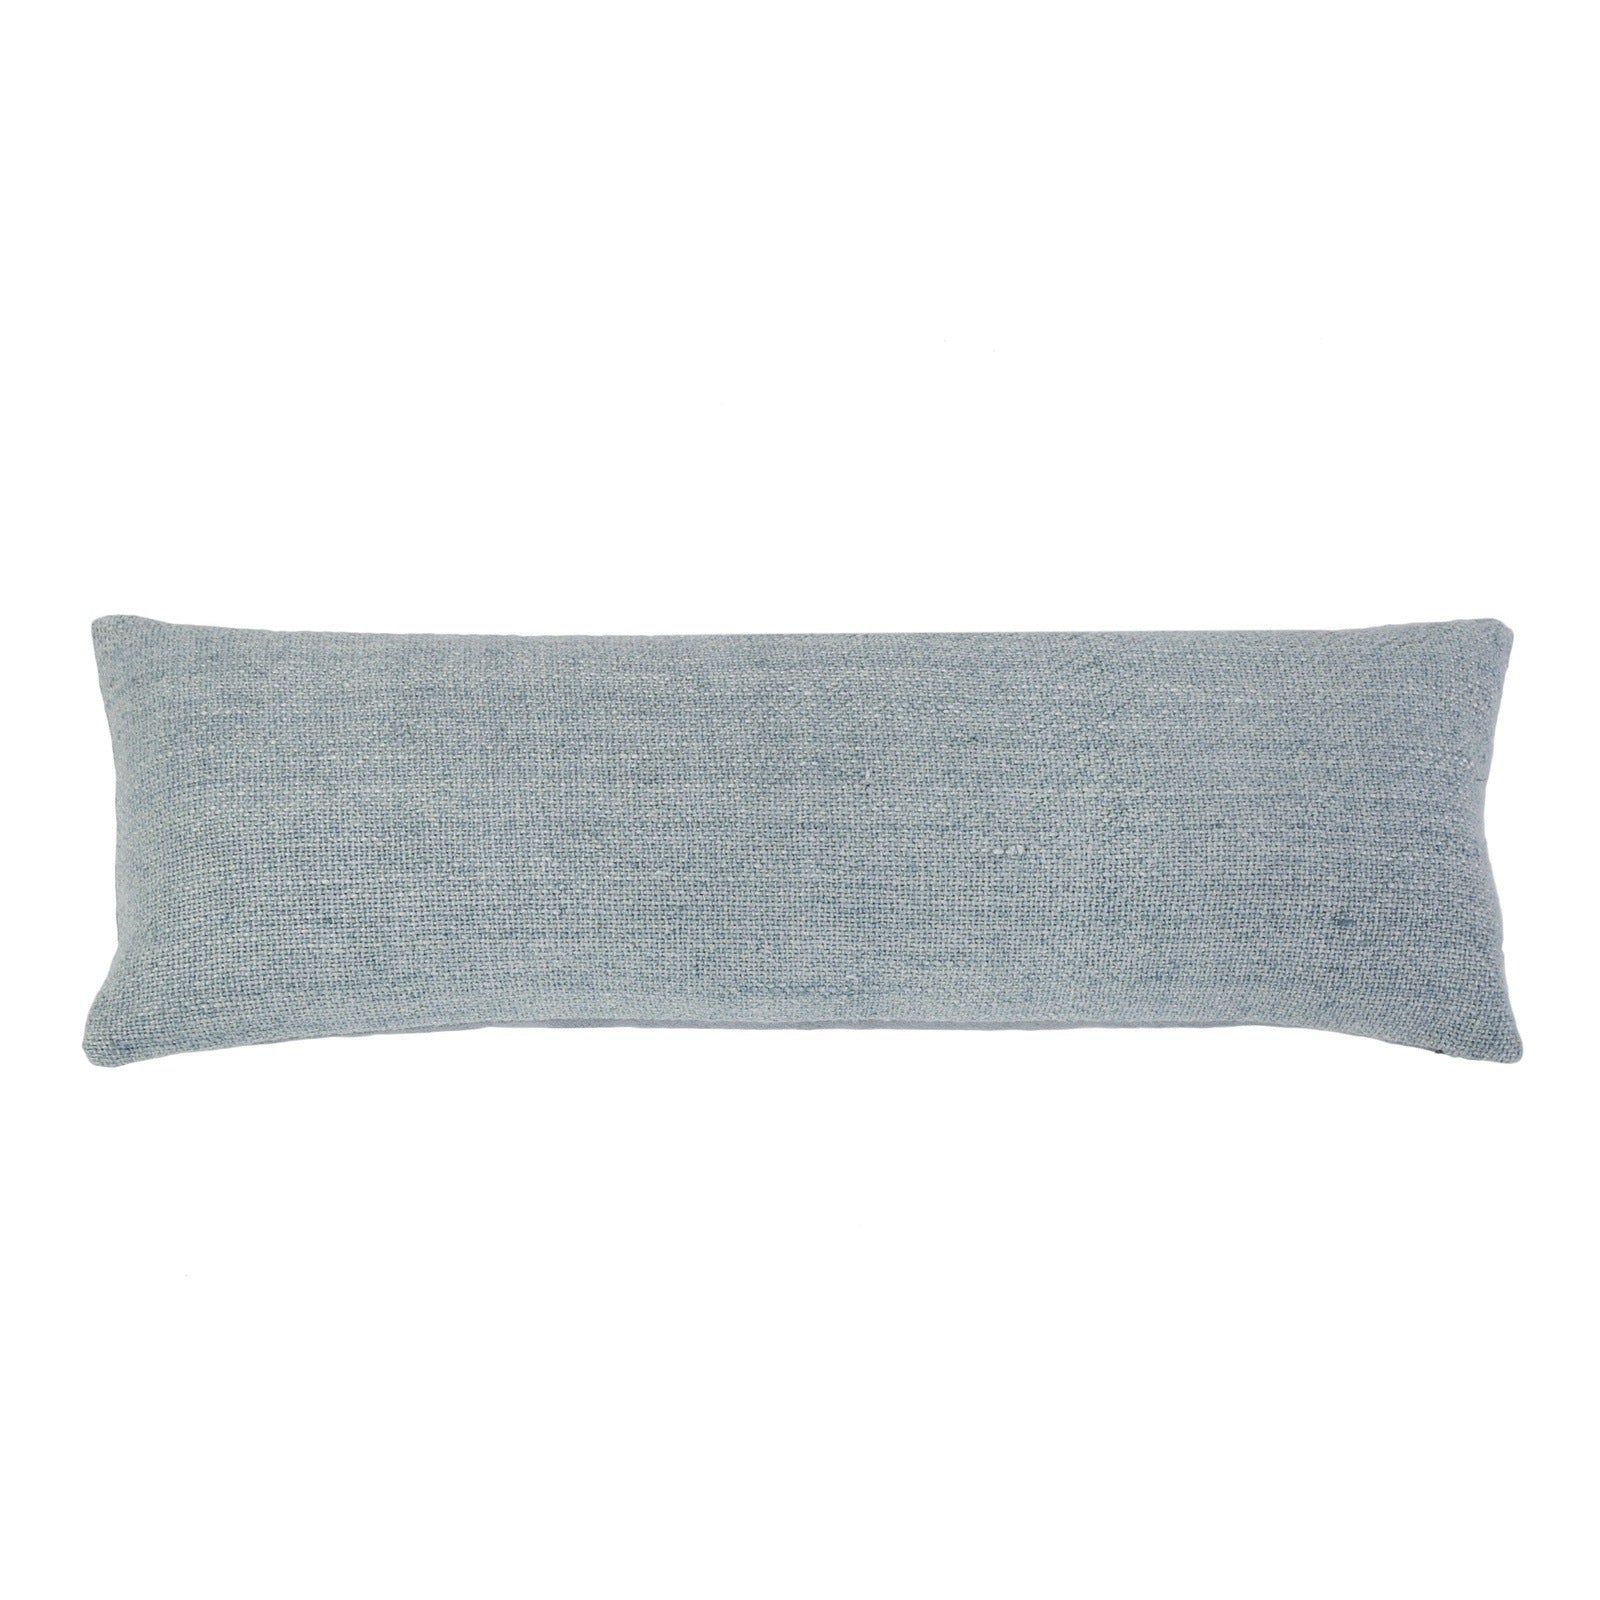 Hendrick 14x40 Pillow by Pom at Home